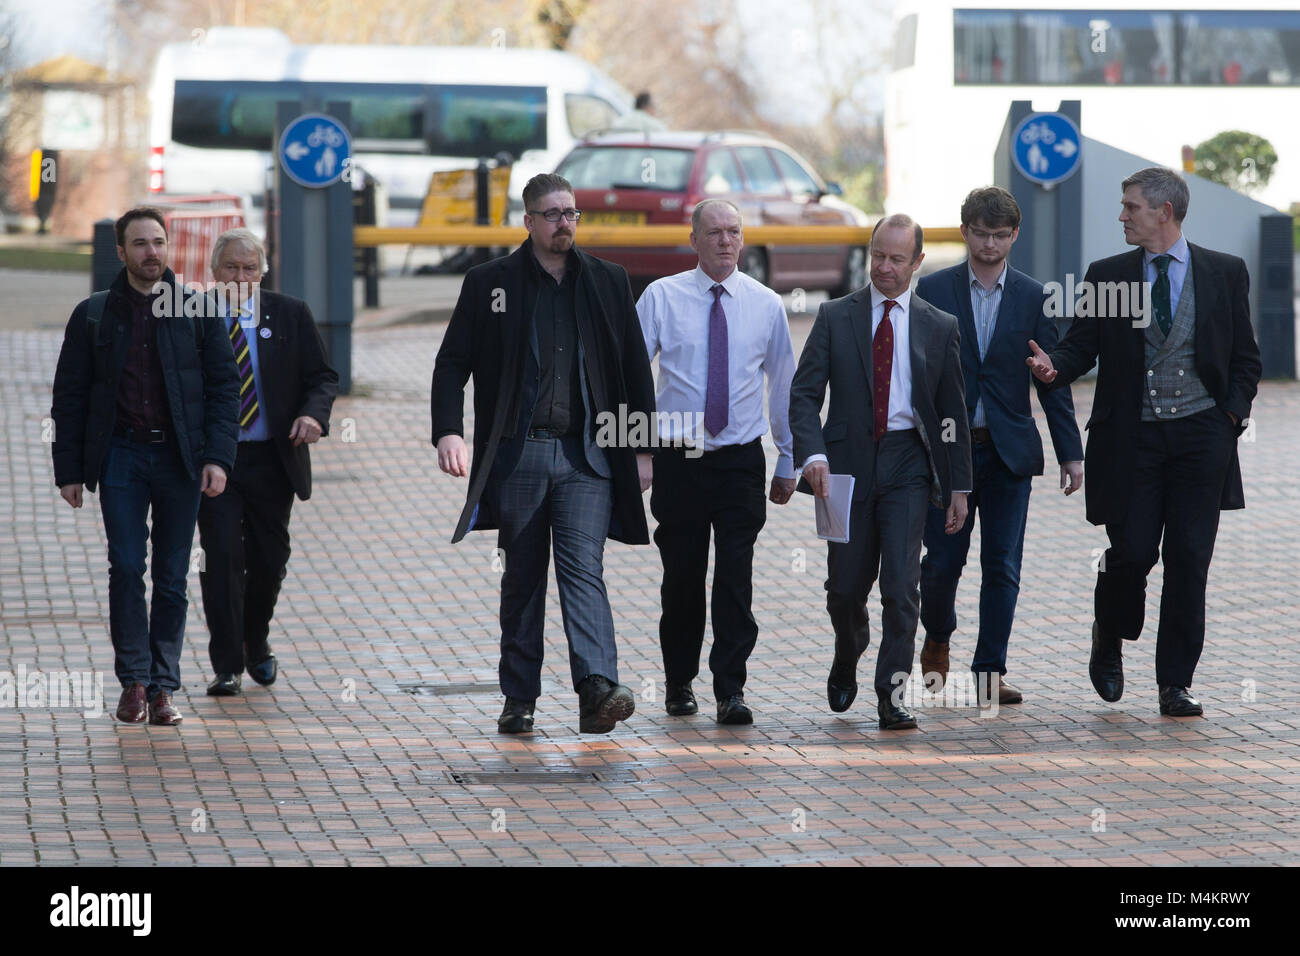 UKIP leader Henry Bolton (third right) arrives at the ICC in Birmingham as the UKIP EGM decide his future as leader. Stock Photo